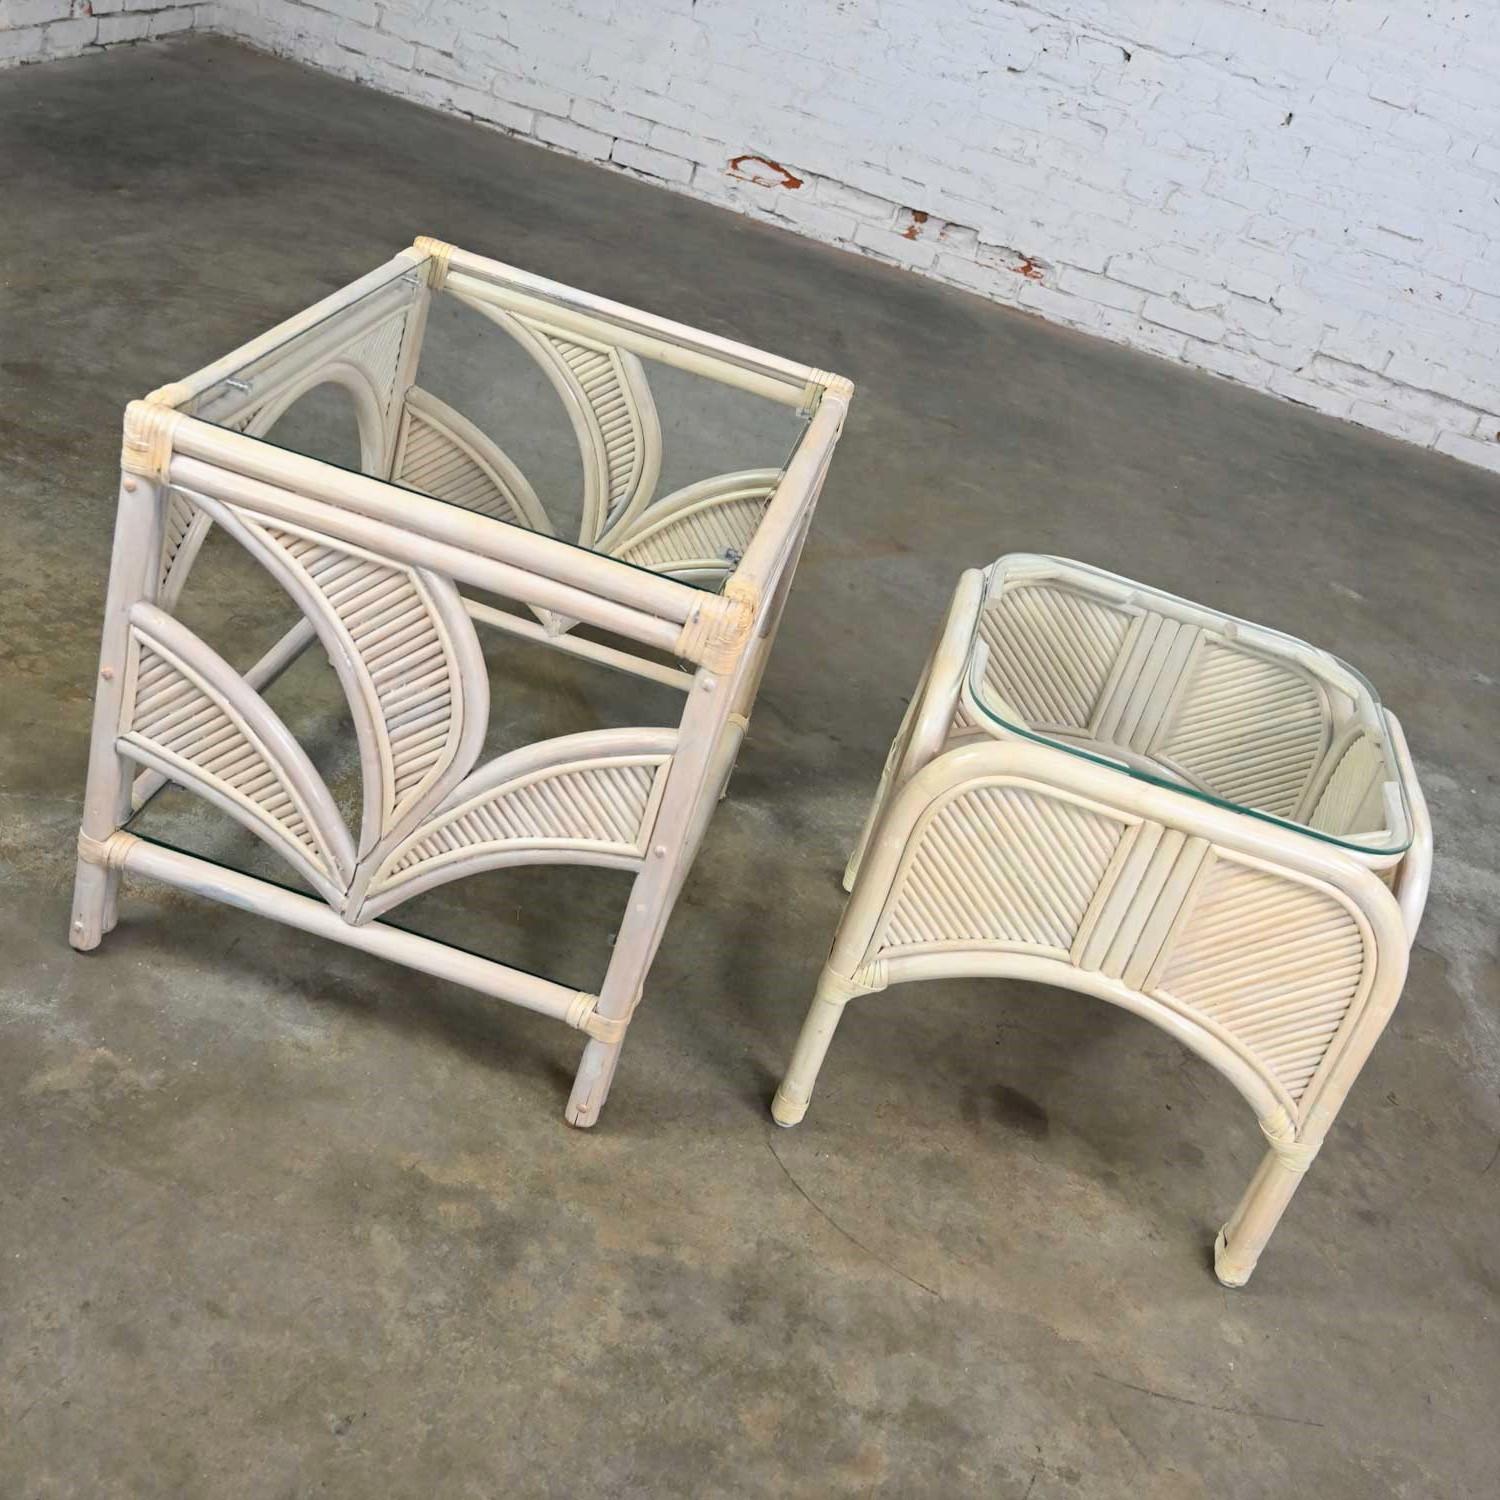 Lovely organic modern cerused reeded rattan 1 large and 1 small end table with glass tops. Beautiful condition, keeping in mind that these are vintage and not new so will have signs of use and wear. Color variances are inherent to the cerused